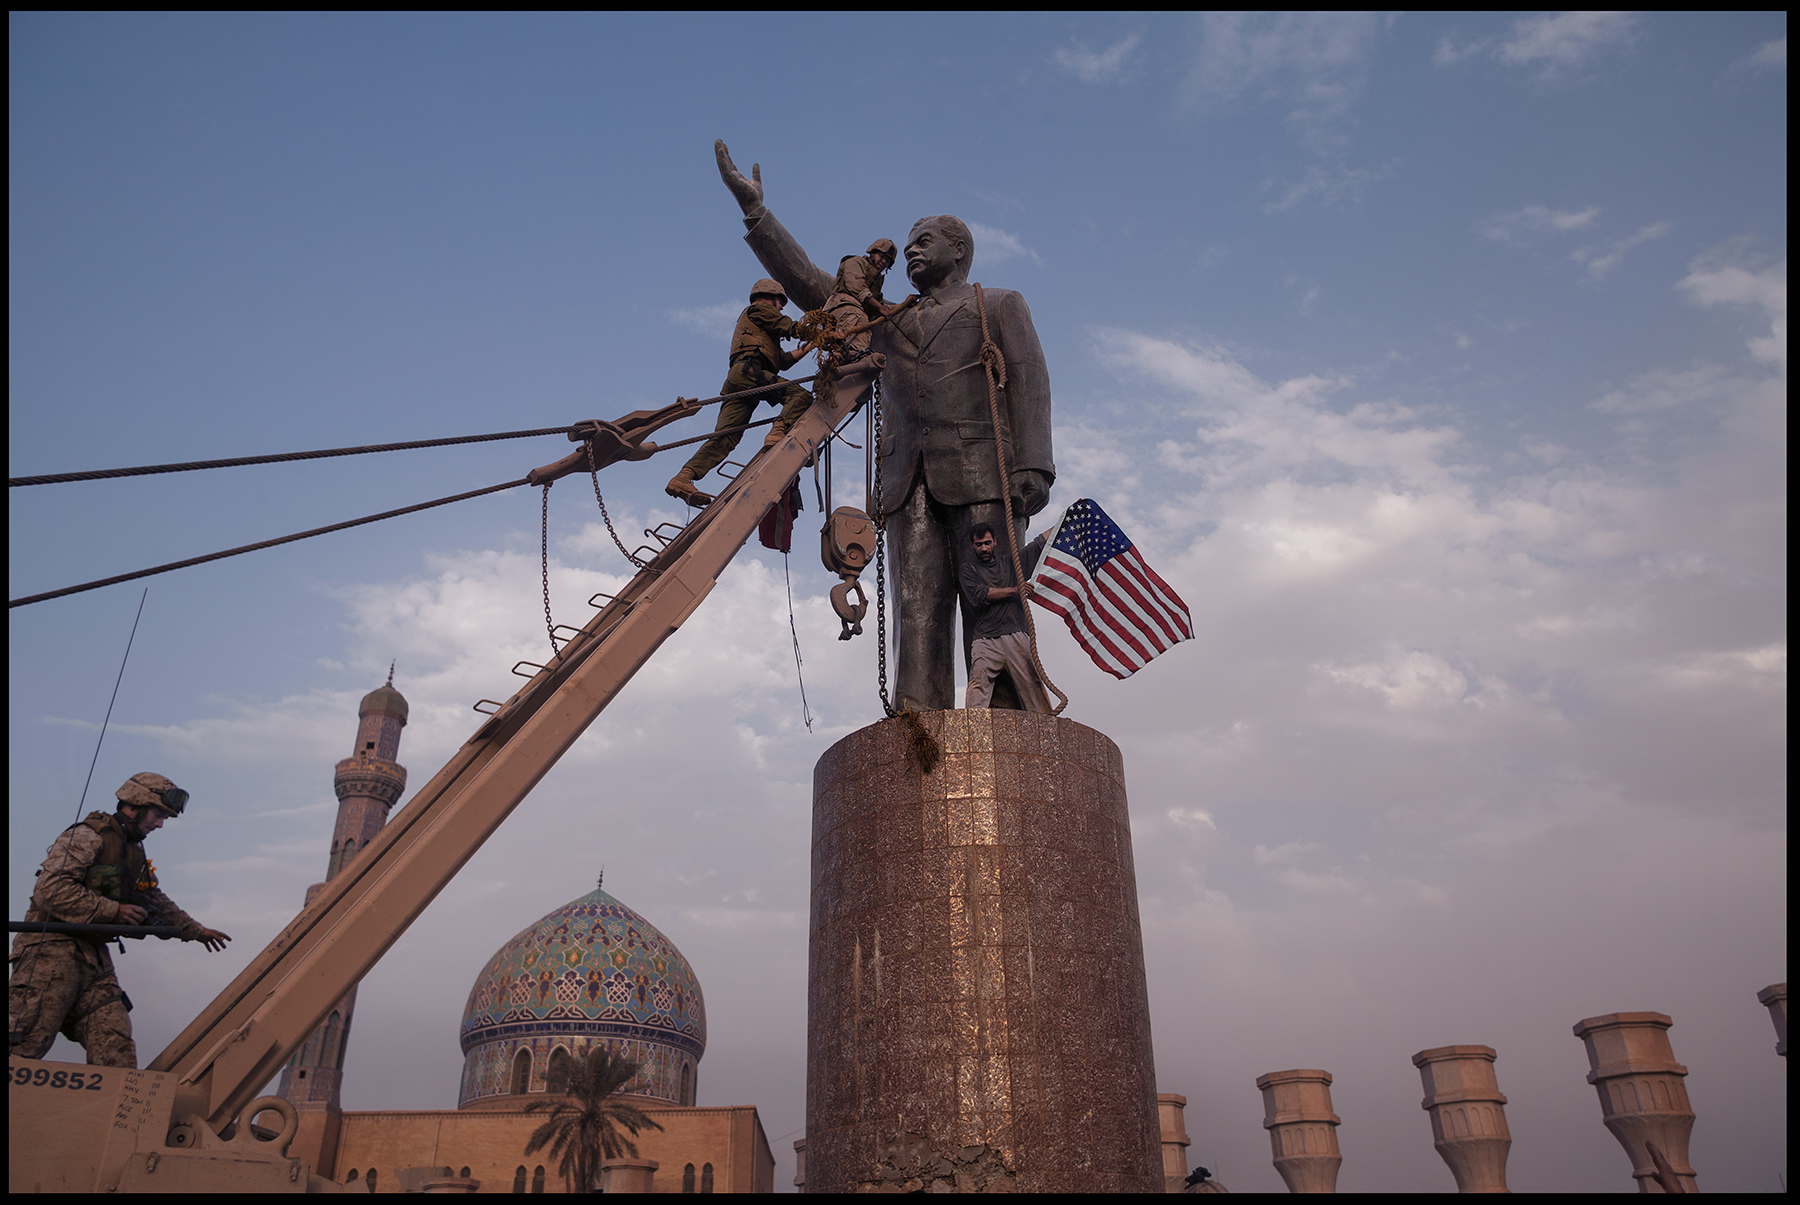 Statue of Iraq’s President Saddam Hussein toppled in Firdos Square, Baghdad, April 9, 2003